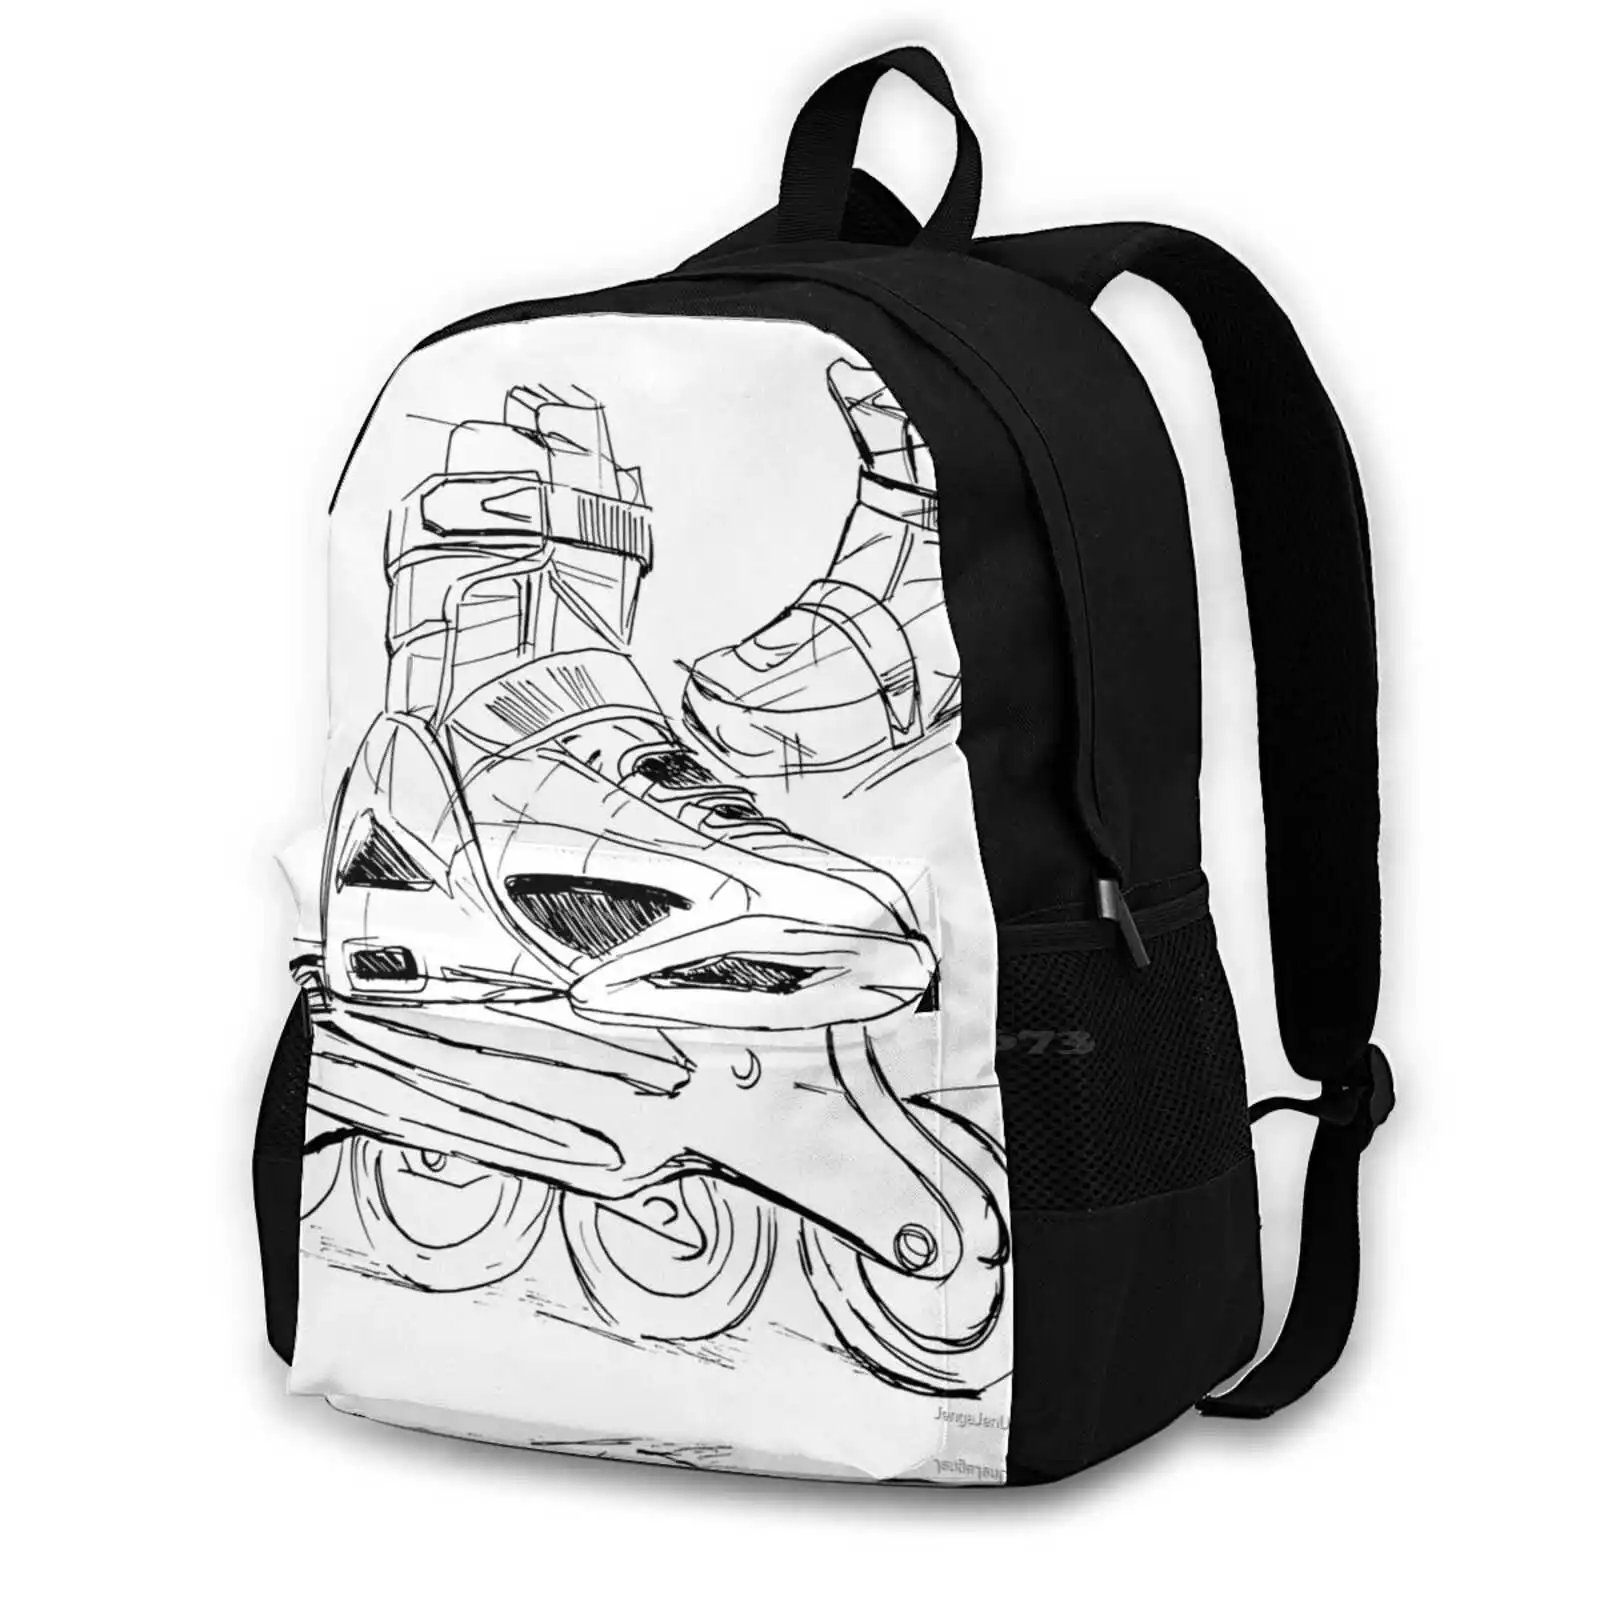 Schematic Backpack For Student School Laptop Travel Bag Skate Schematic